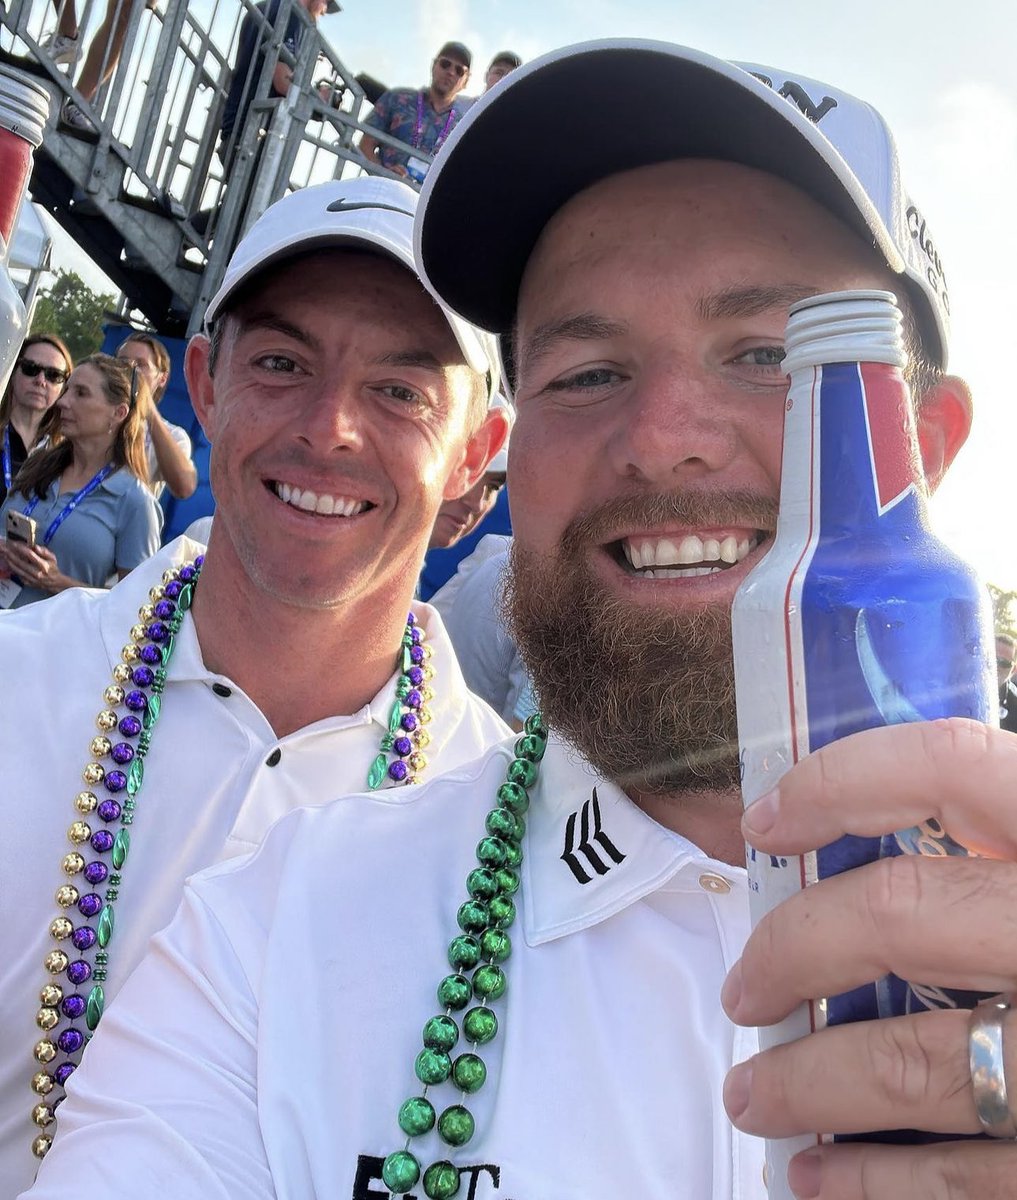 🚨📸🍺 Shane Lowry takes to Instagram for a winning selfie with Rory and a beer in hand @TrackingRory @LowryTracker